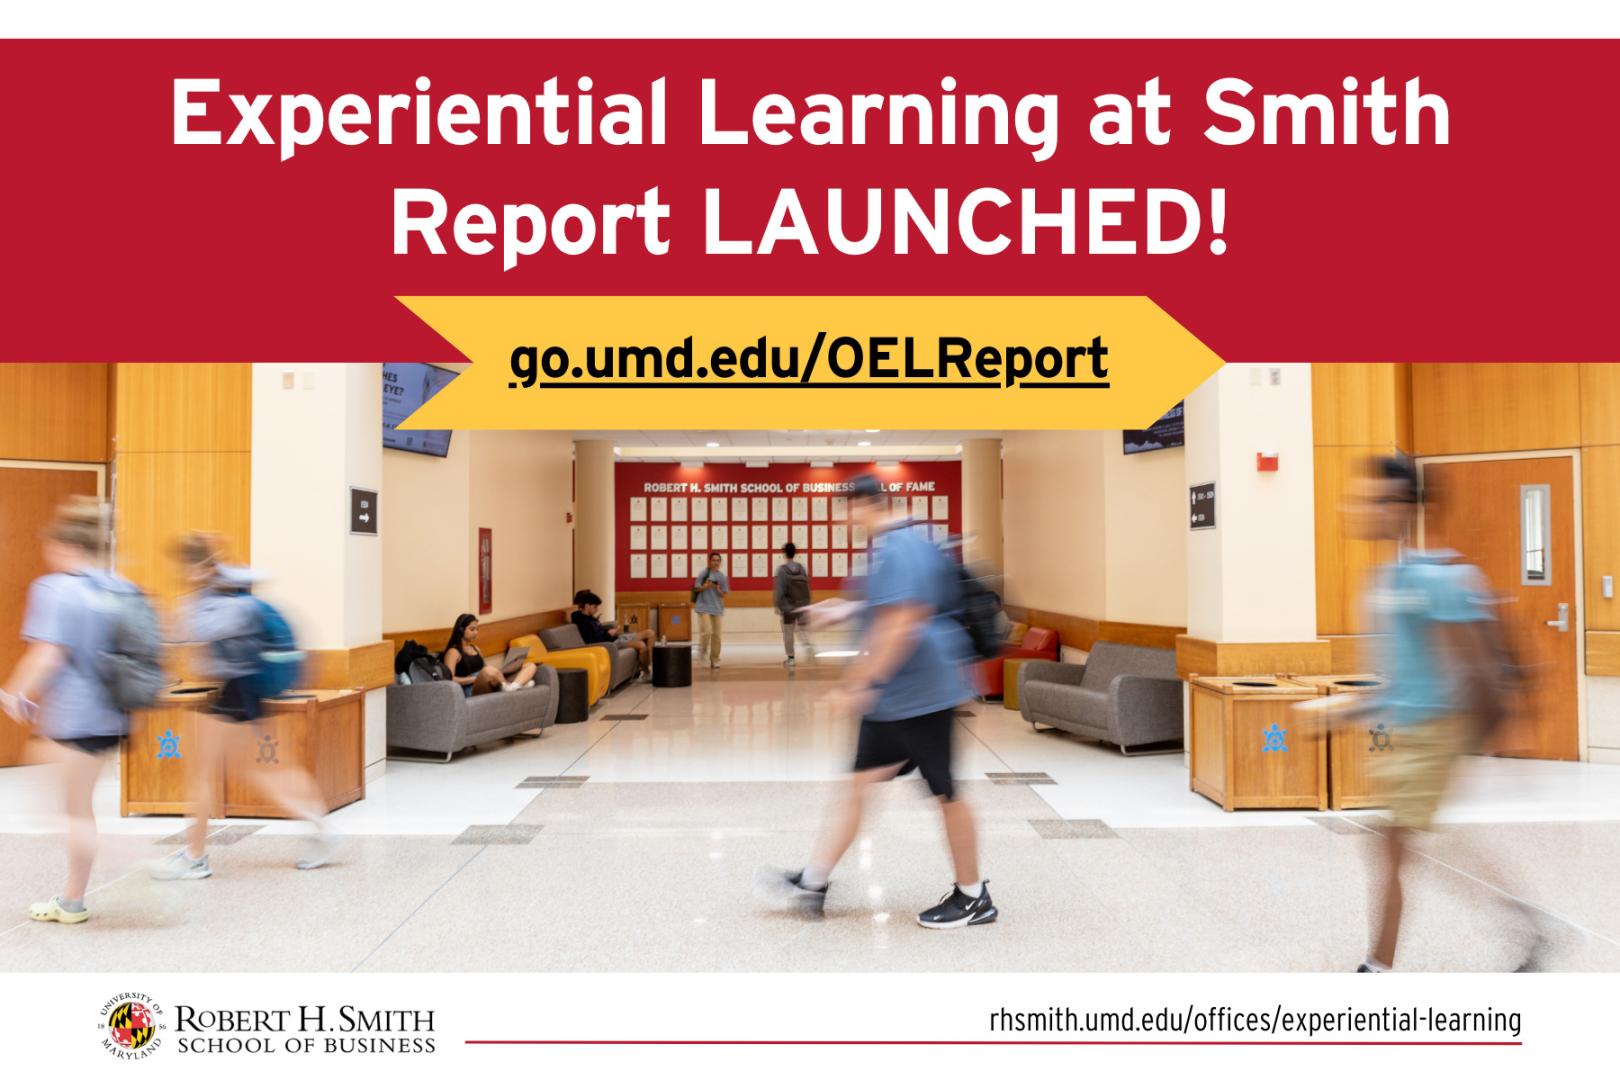 Experiential Learning Thriving at Smith: OEL Annual Report